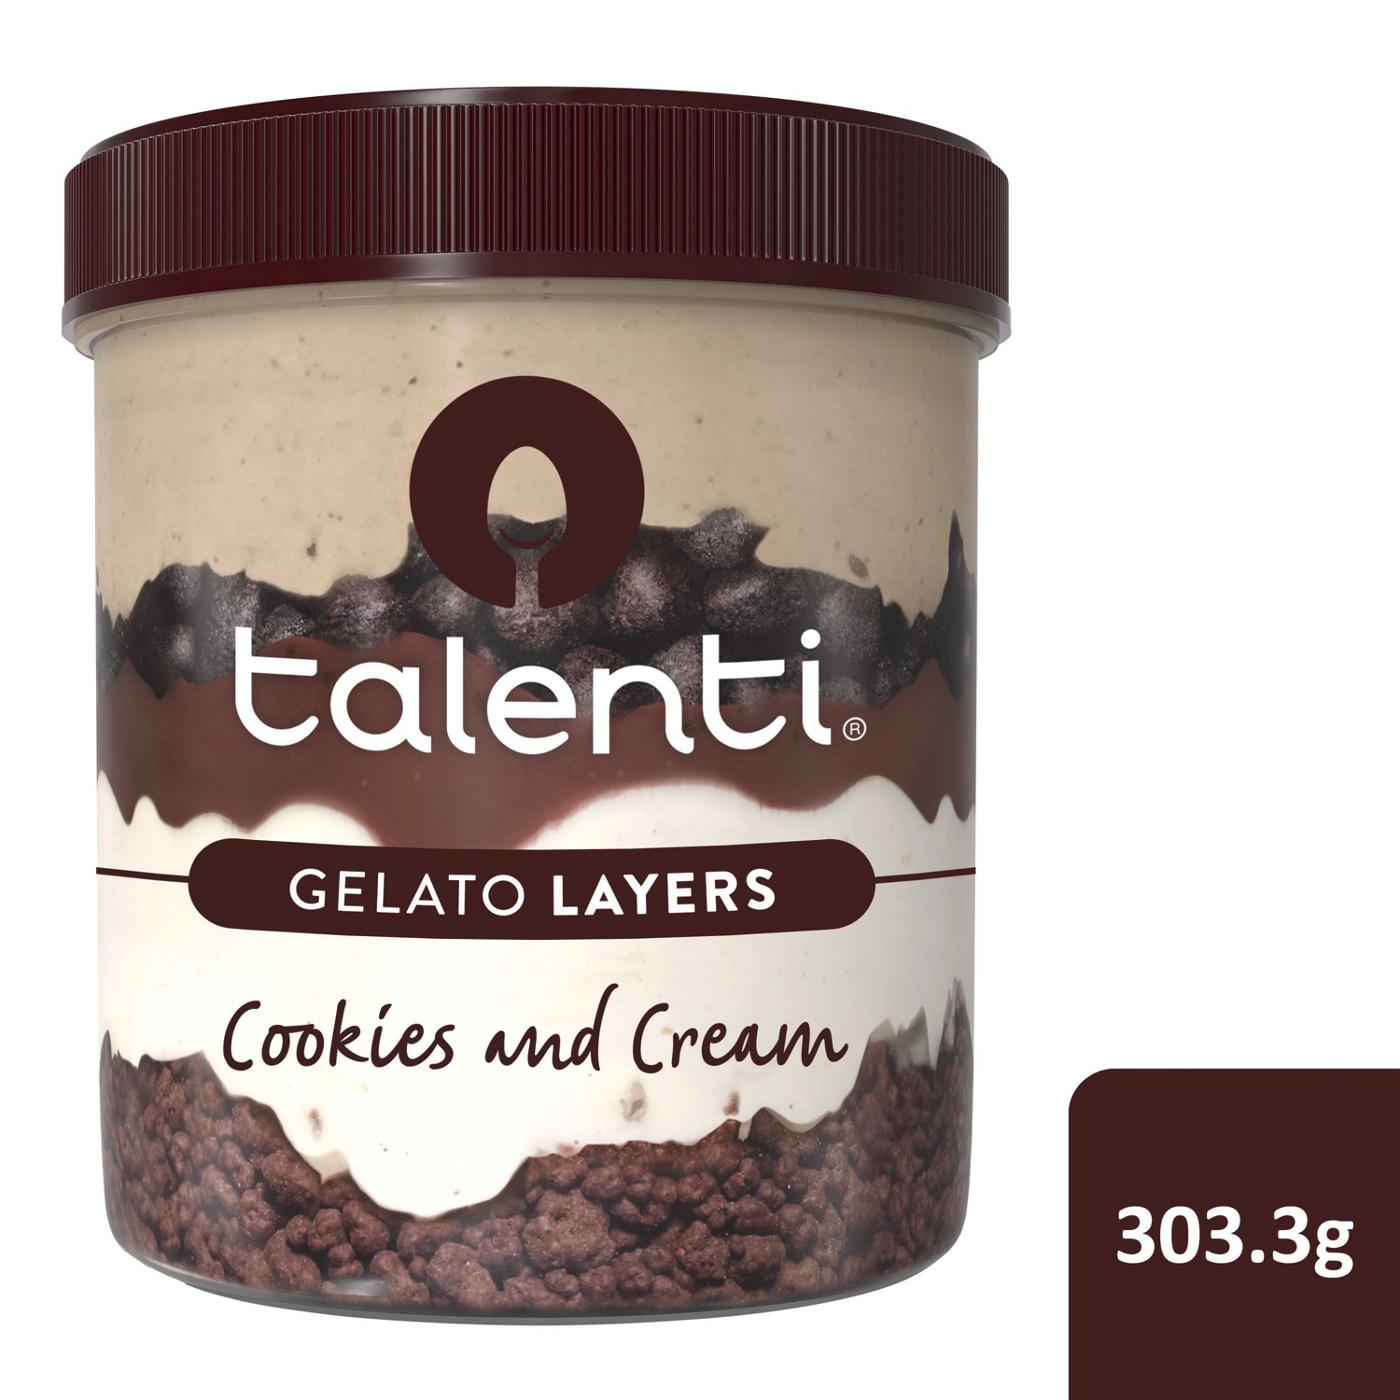 Talenti Gelato Layers Cookies and Cream; image 3 of 3